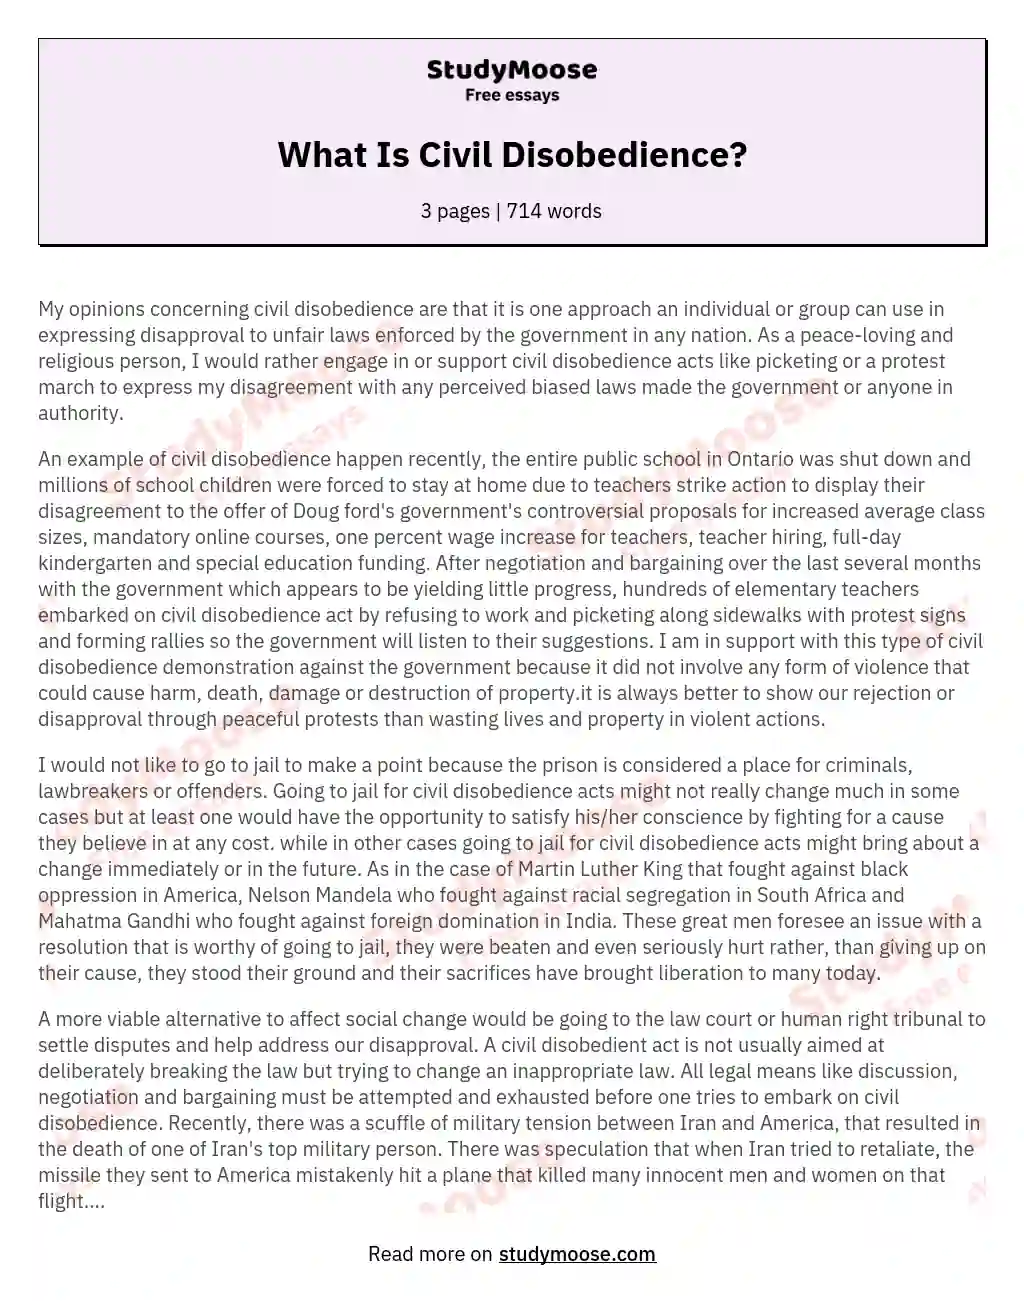 What Is Civil Disobedience? essay